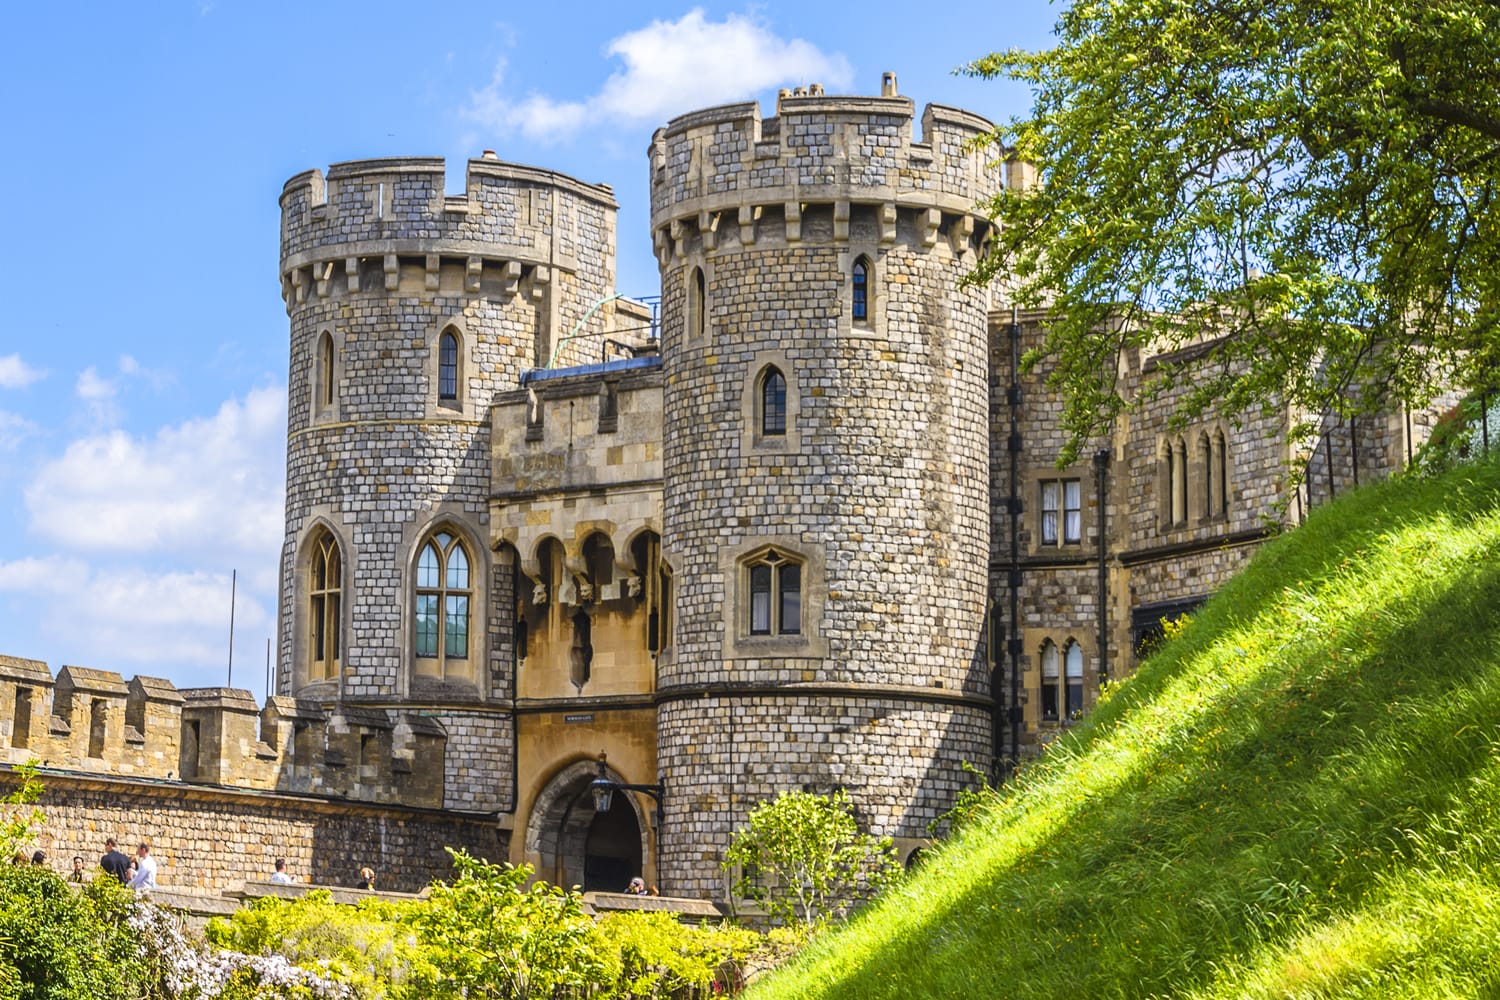 Outside view of Medieval Windsor Castle. Windsor Castle is a royal residence at Windsor in the English county of Berkshire.